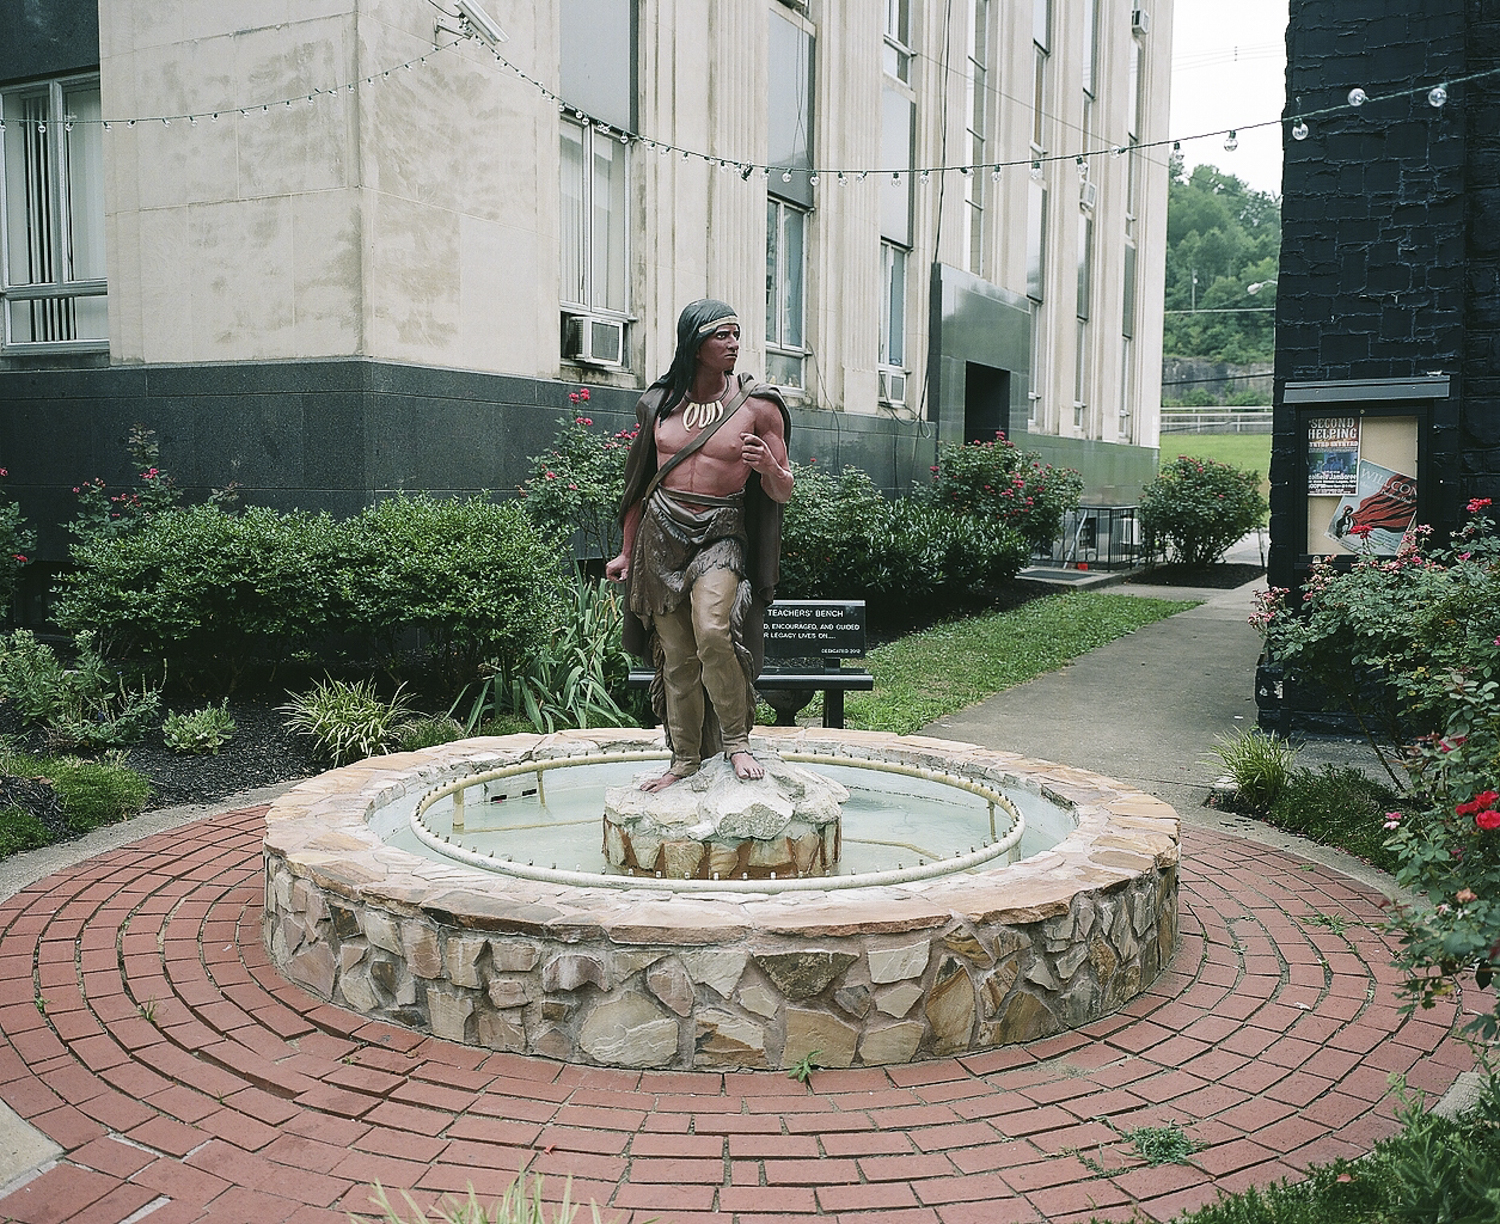  Logan statue outside the Mingo County courthouse, Williamson, West Virginia. 